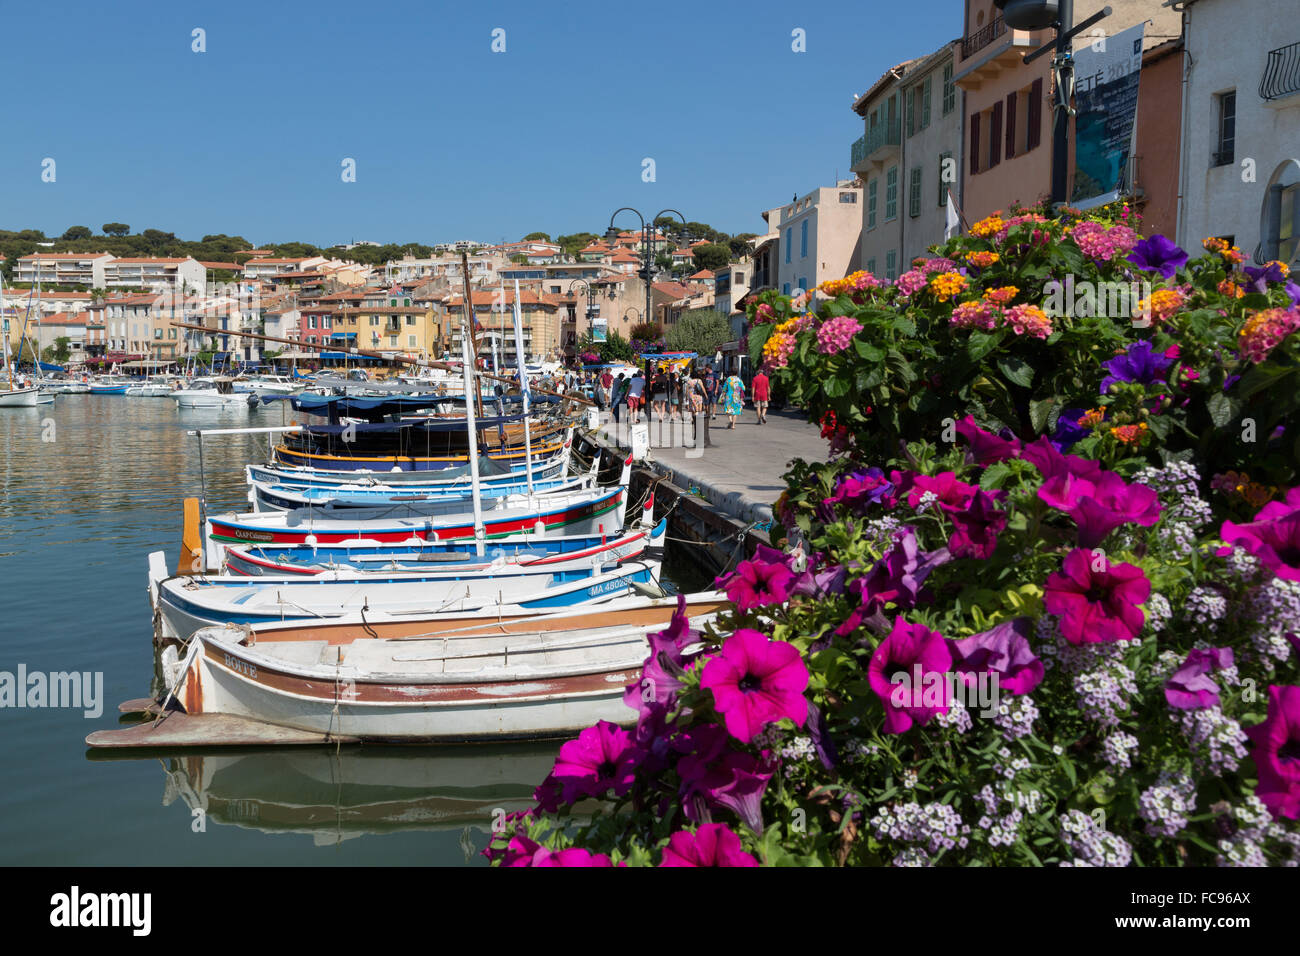 Traditional fishing boats moored in the harbour of the historic town of Cassis, Cote d'Azur, Provence, France, Mediterranean Stock Photo